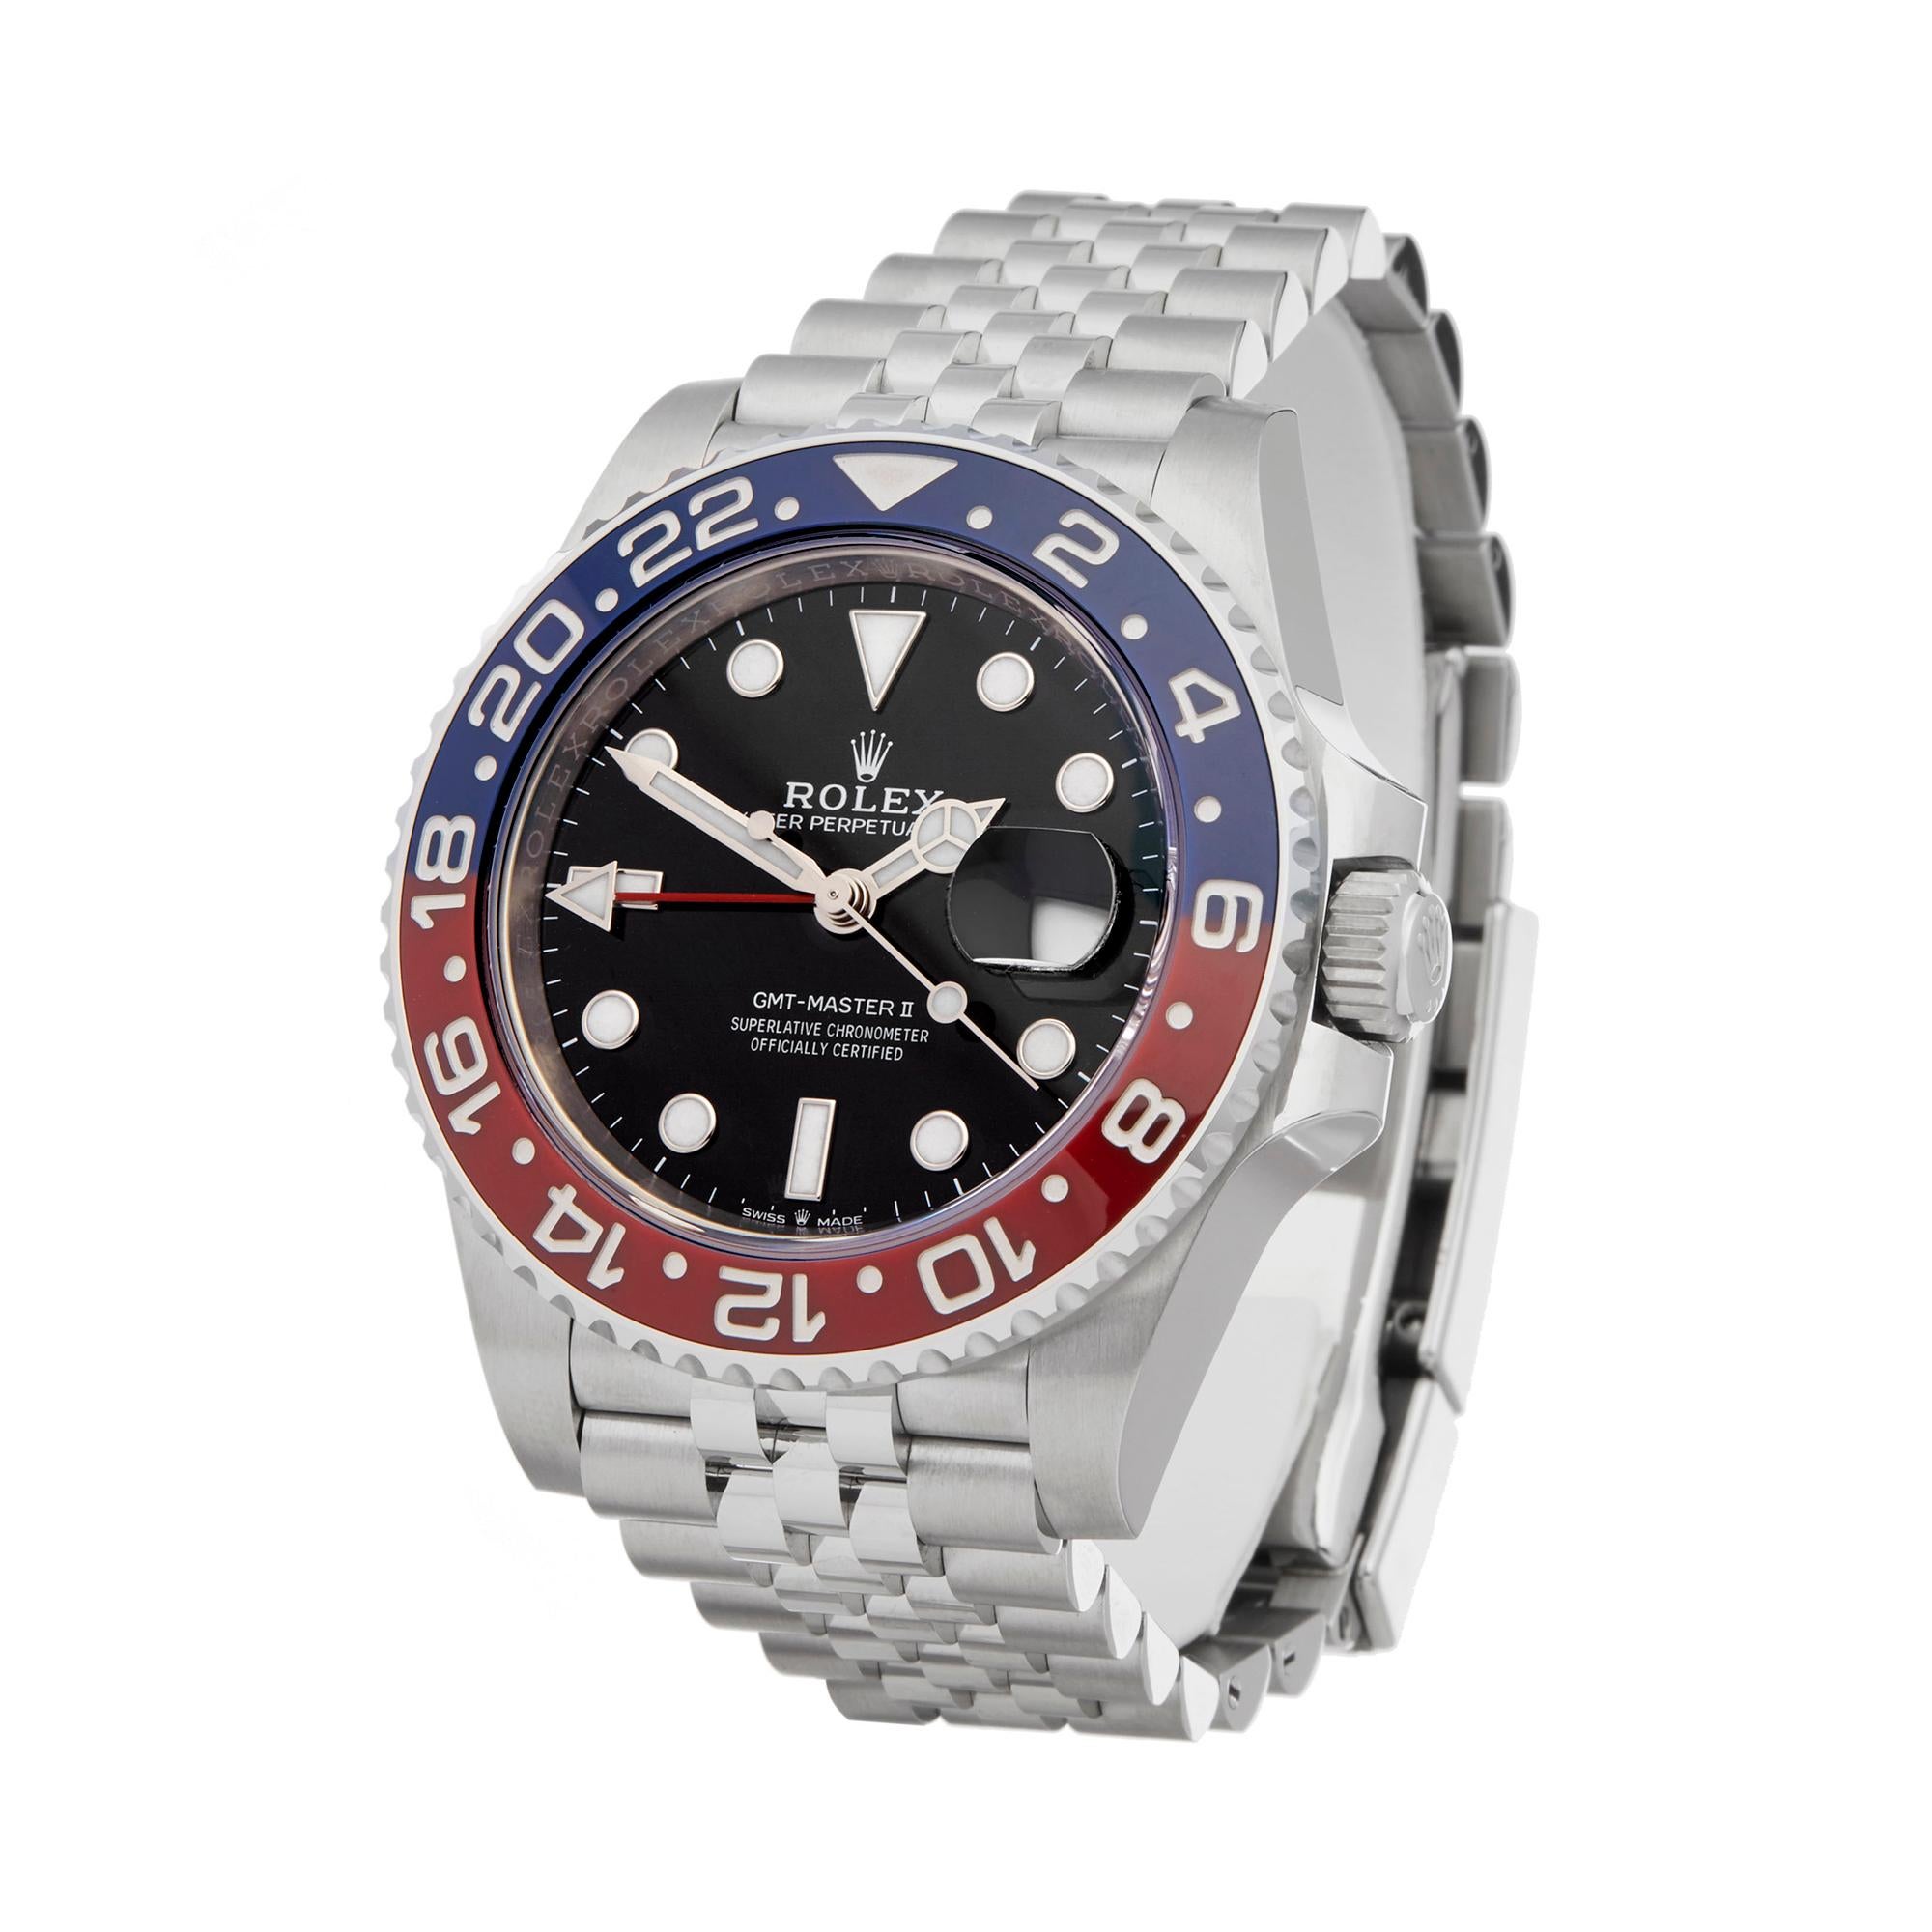 Ref: W6350
Manufacturer: Rolex
Model: GMT-Master II
Model Ref: 126710BLRO
Age: 9th May 2019
Gender: Mens
Complete With: Box, Manuals, Booklet, Tag & Bezel Guard
Dial: Black Other
Glass: Sapphire Crystal
Movement: Automatic
Water Resistance: To